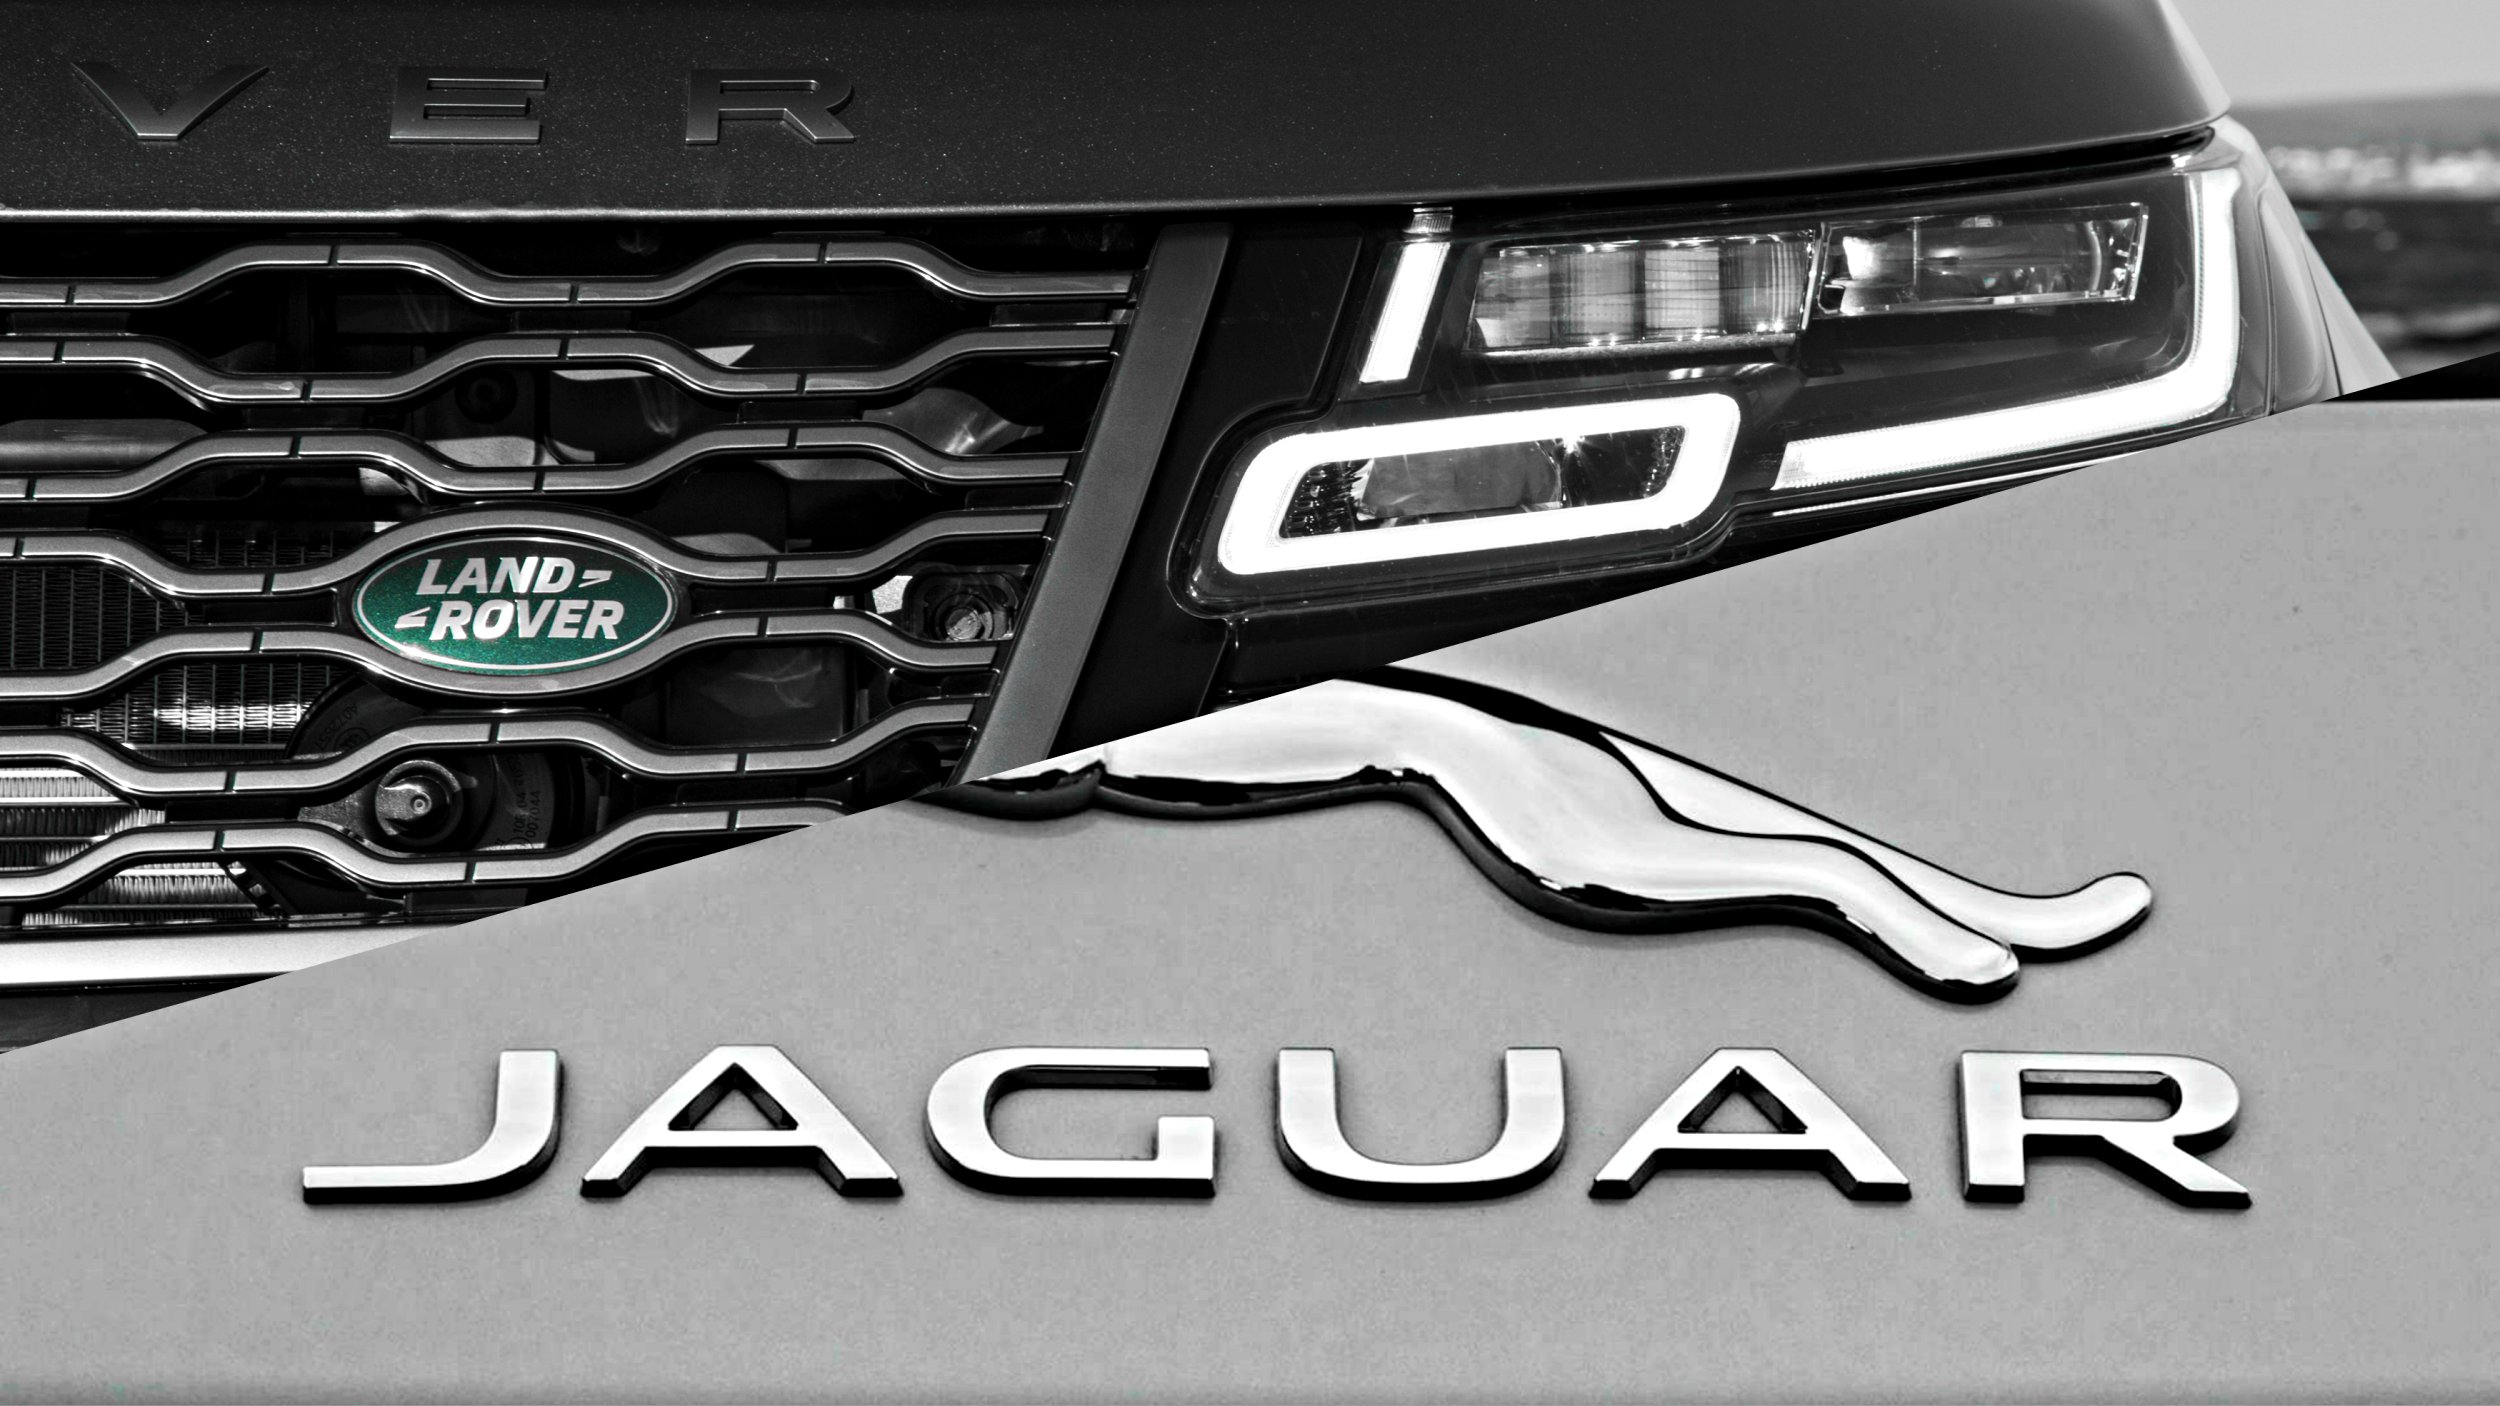 News JaguarLand Rover To Refresh Lineup By 2024